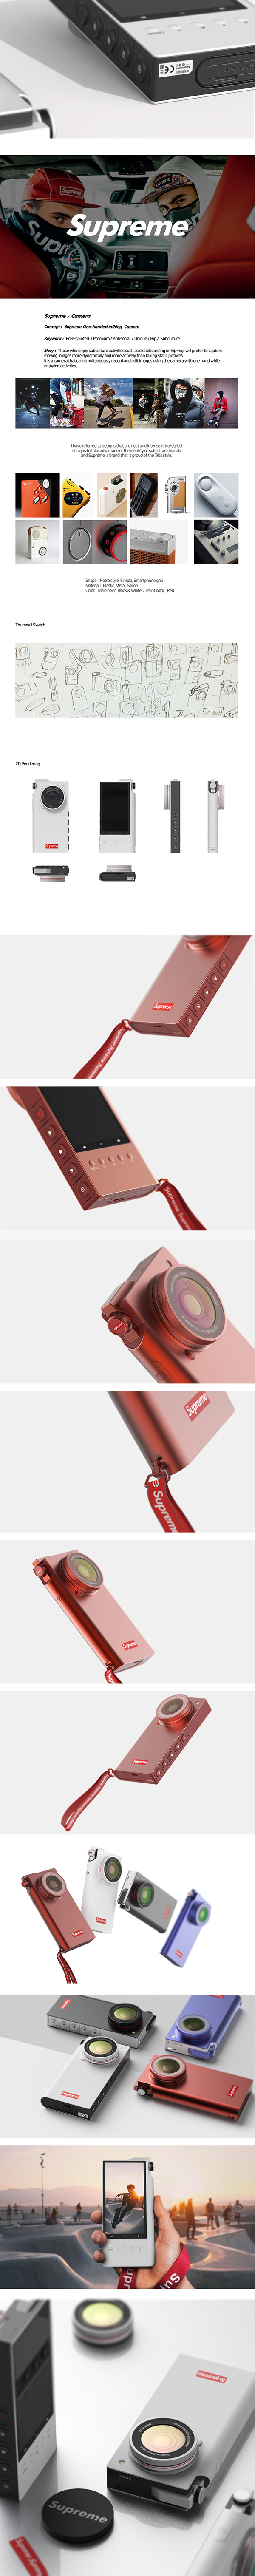 Supreme One-handed editing Camera